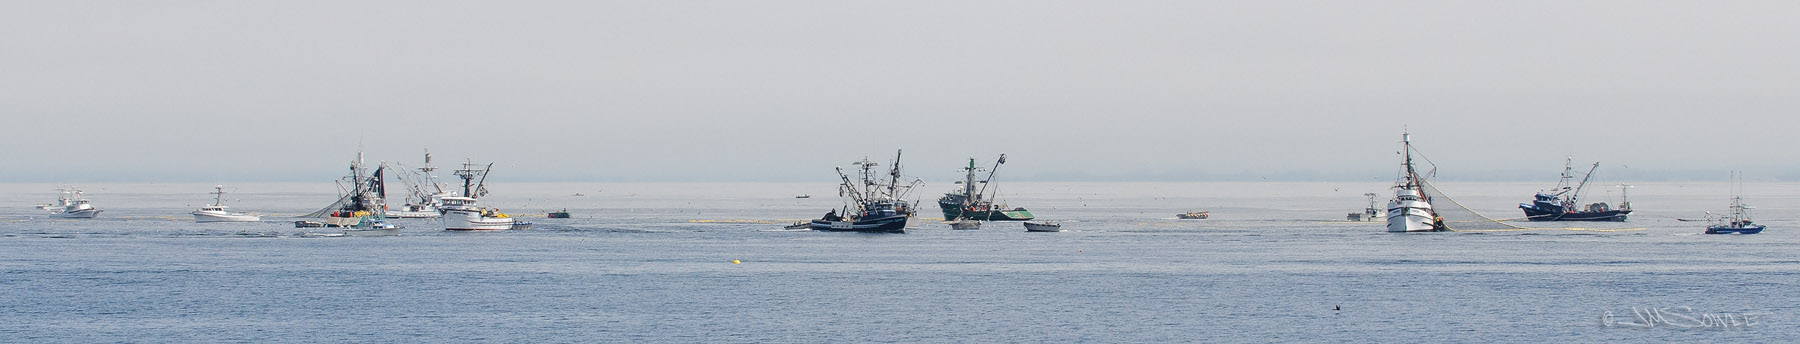 NorthCali2014_103.JPG - Fishing boats during some kind of major operation right in Monterey Harbor.